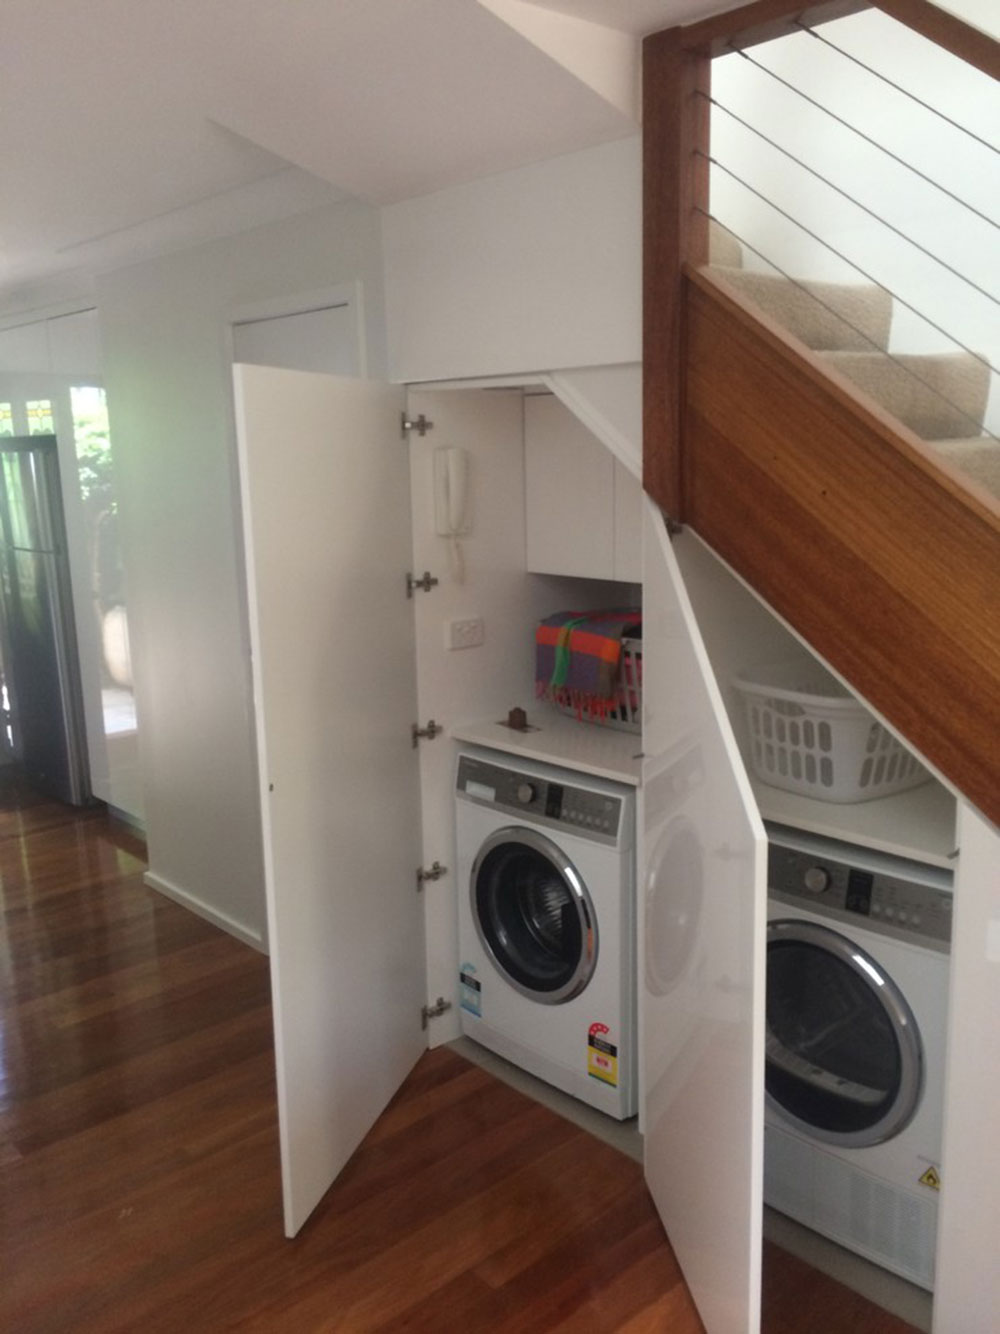 Laundry-moved-to-utilise-space-under-stairs-by-McGarry-Constructions-Pty-Limited Under Stairs Storage to Maximize the Space from Your House